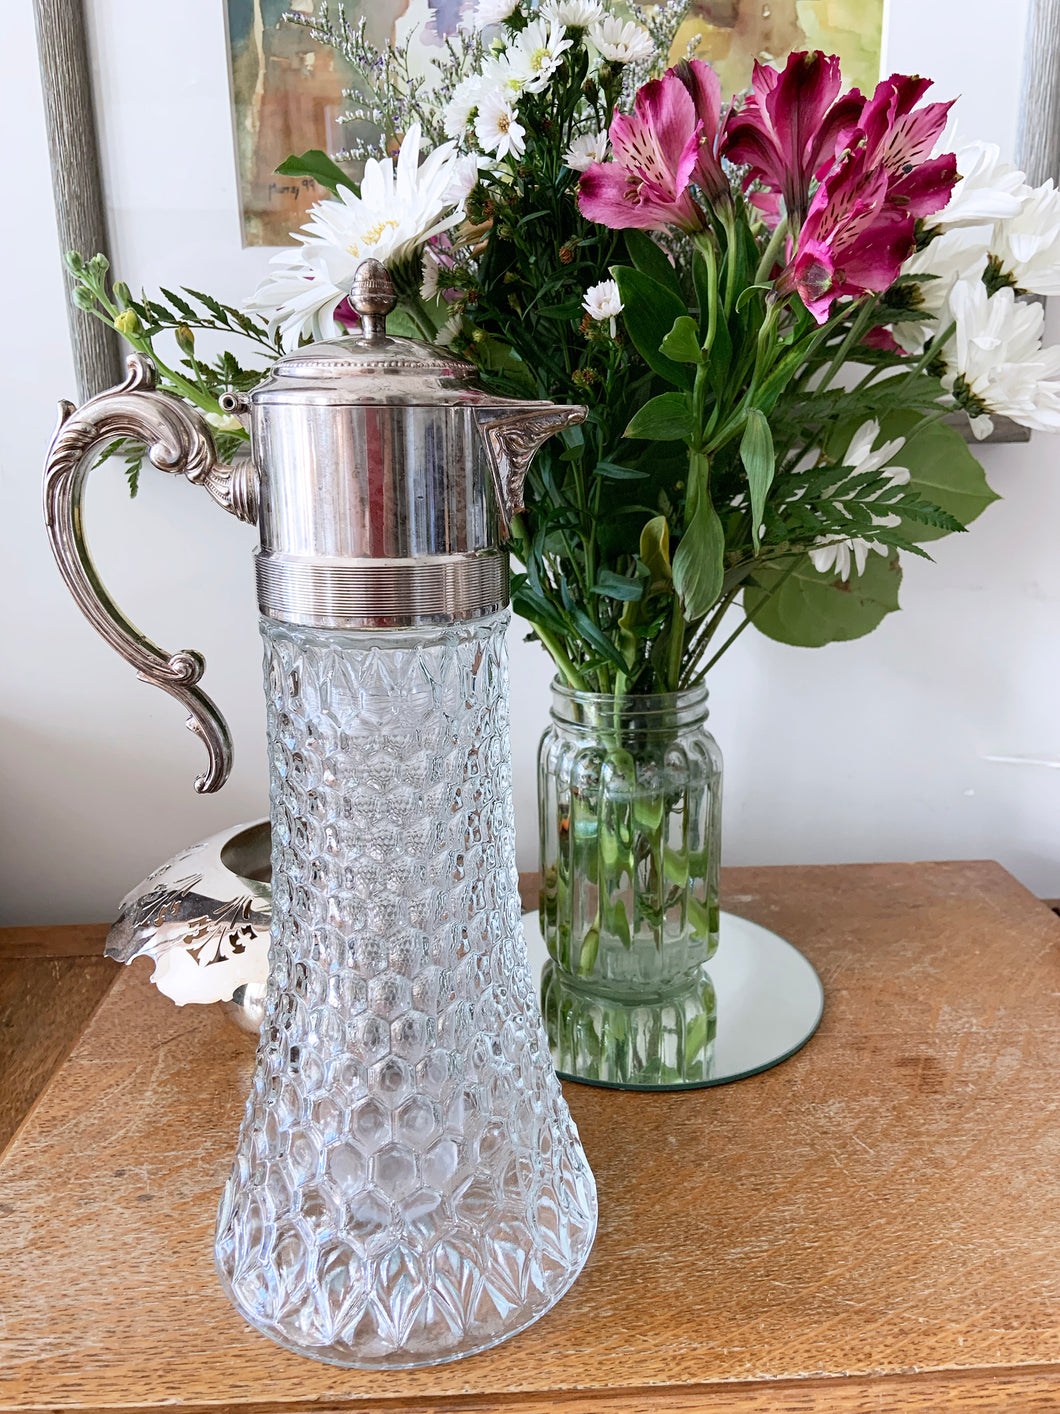 Vintage honeycomb patterned pressed glass wine carafe with a beautifully ornate art nouveau style silver-plated hinged and handled lid with ice chamber insert. A stunning piece of mid-century craftsmanship by F.B. Rogers Silver Co.  The glass and insert are excellent condition, free from chips/cracks. The silver has some minor discolouration.  Measures 14